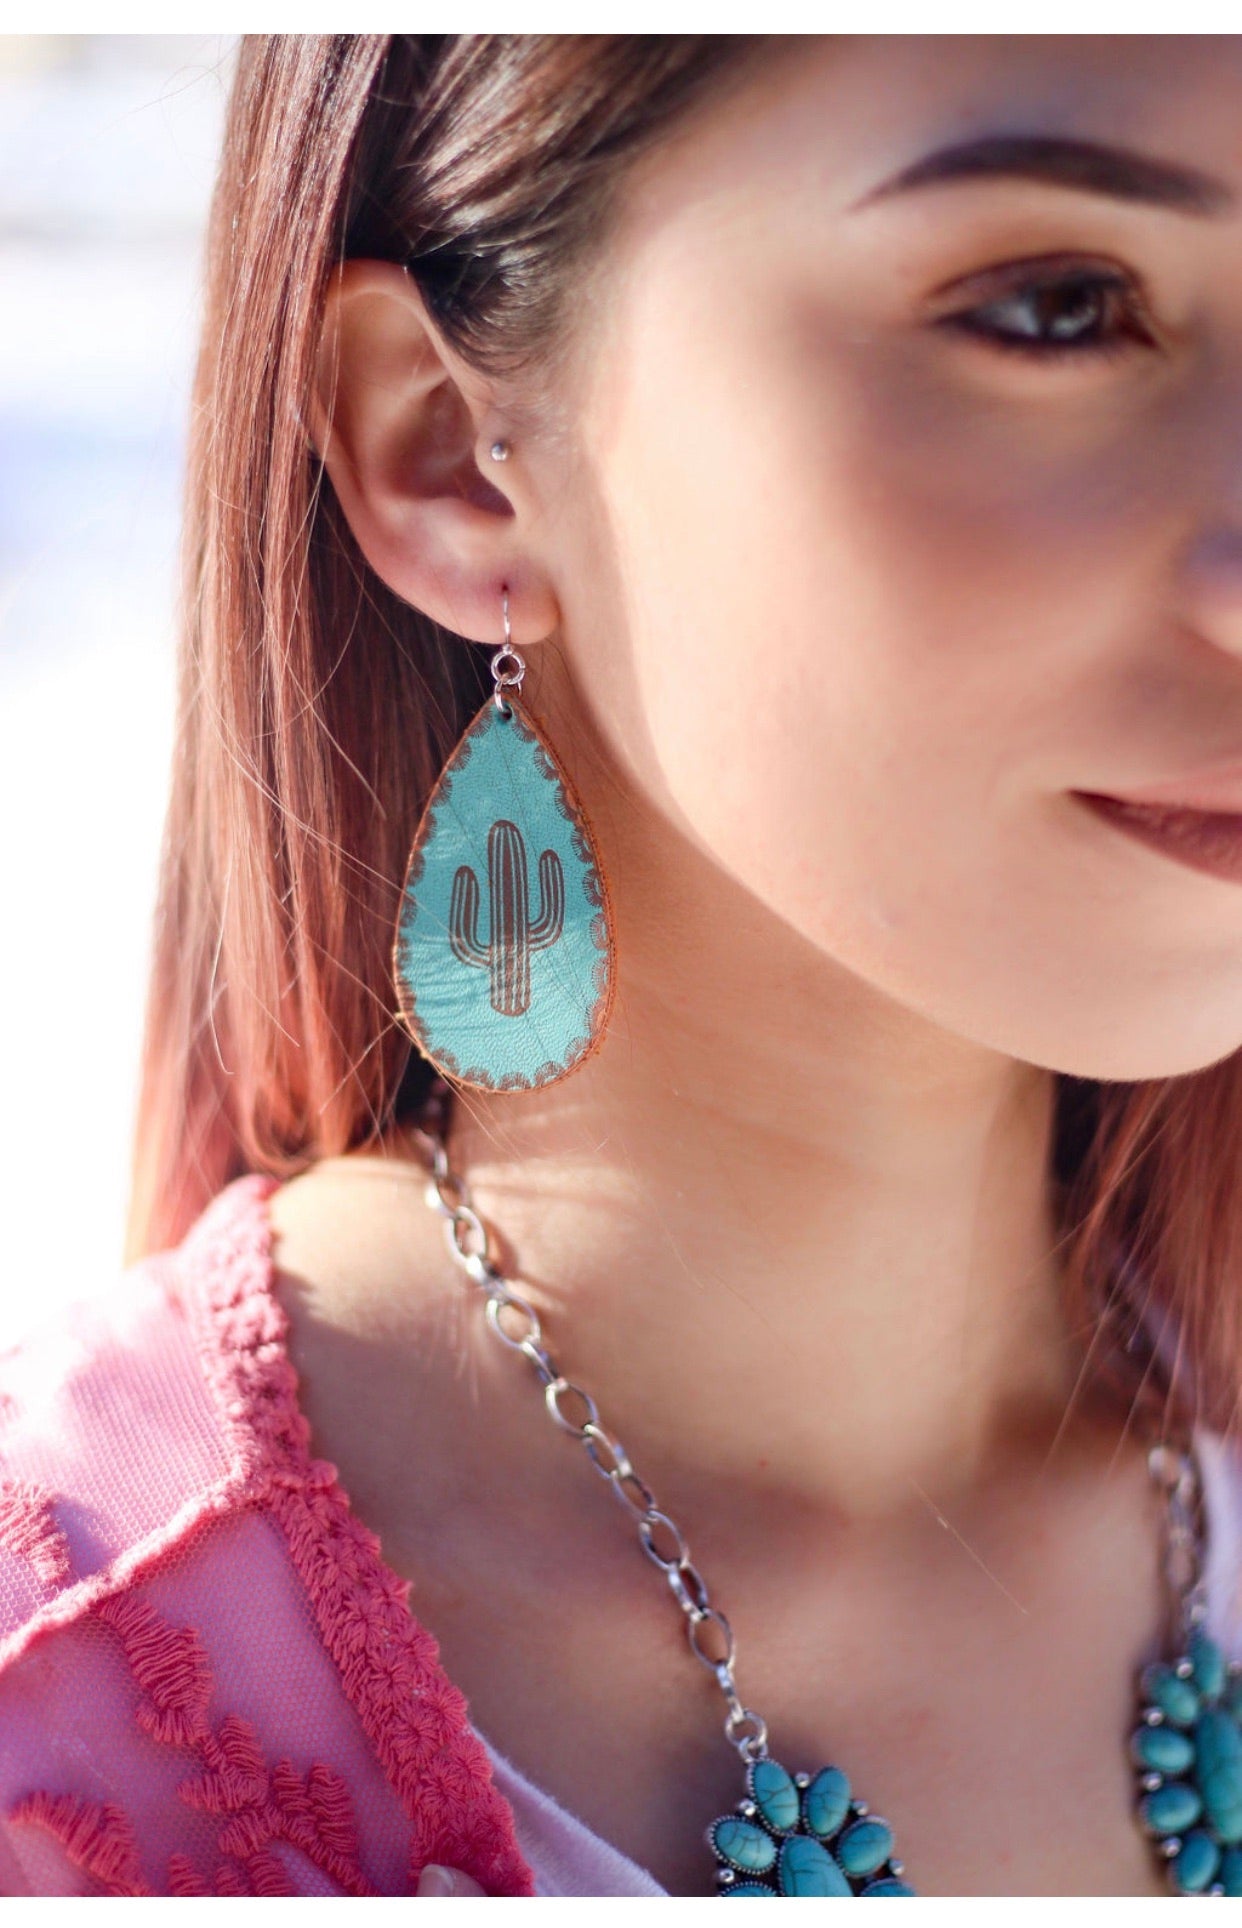 Leather Cactus Earrings - Ruby Rue Jewelry & Accessories